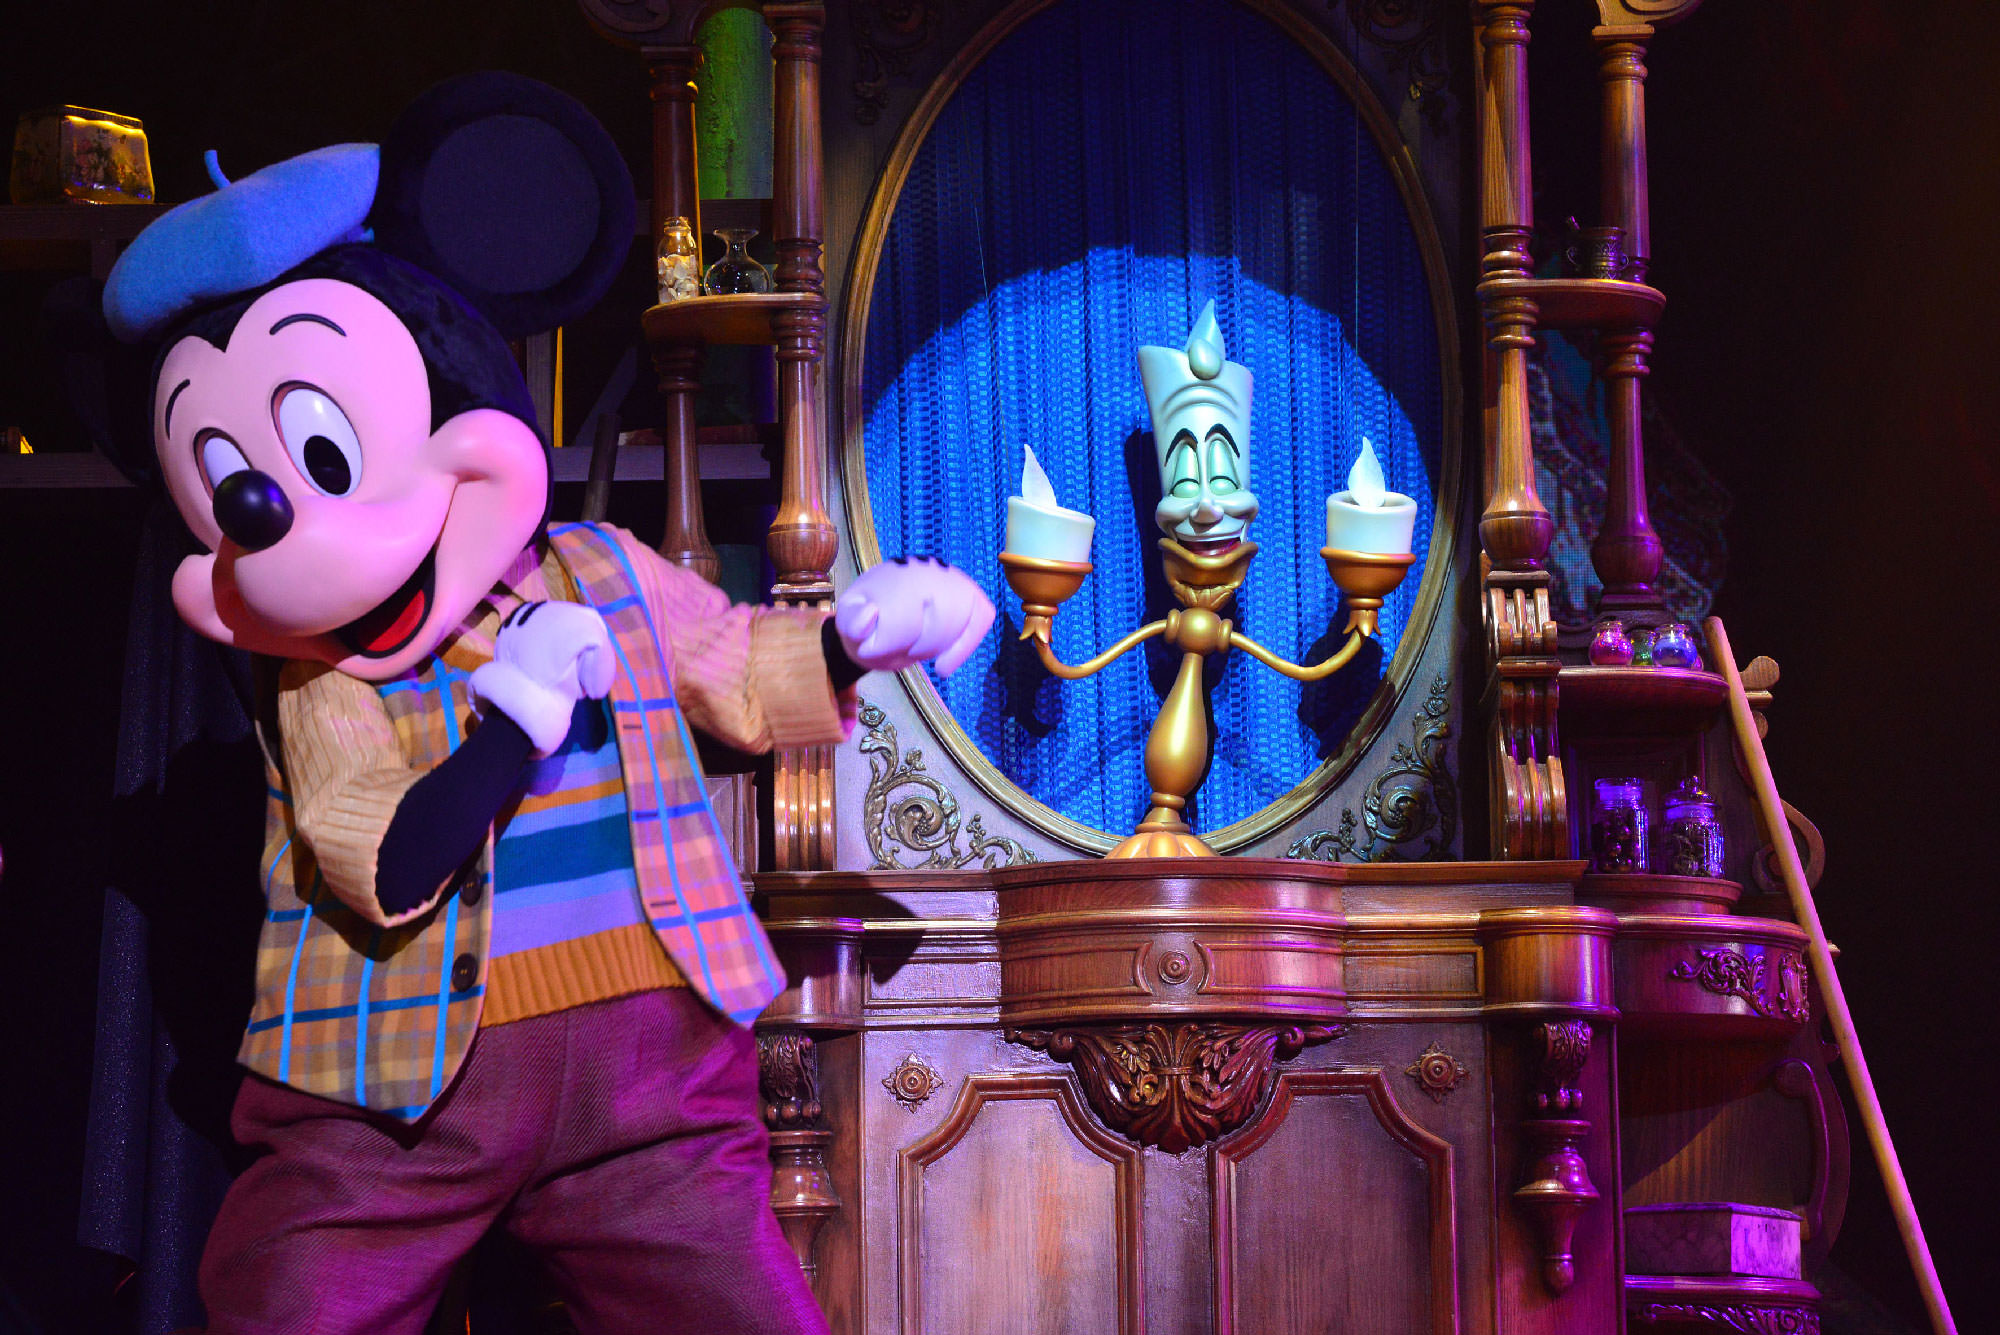 Micket et le Magicien - Disneyland Paris - Mickey and the Magician